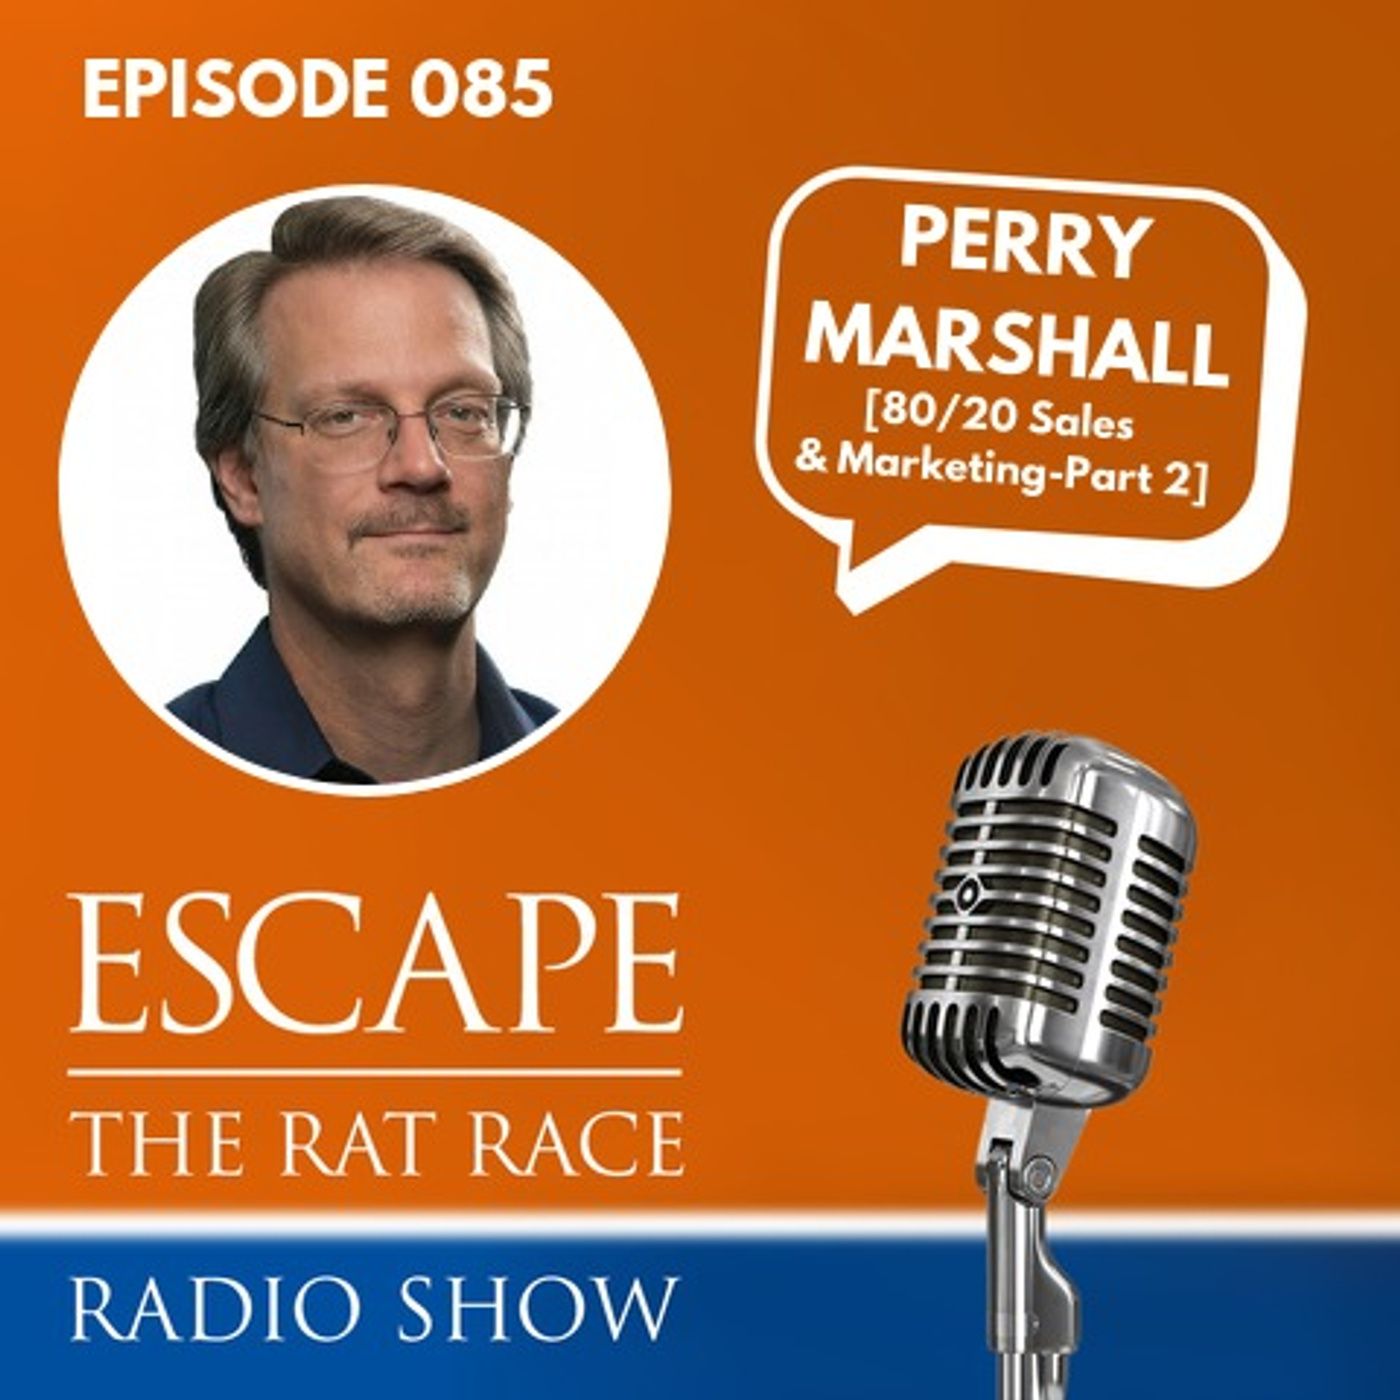 Perry Marshall - 80/20 Sales & Marketing [Part 2]